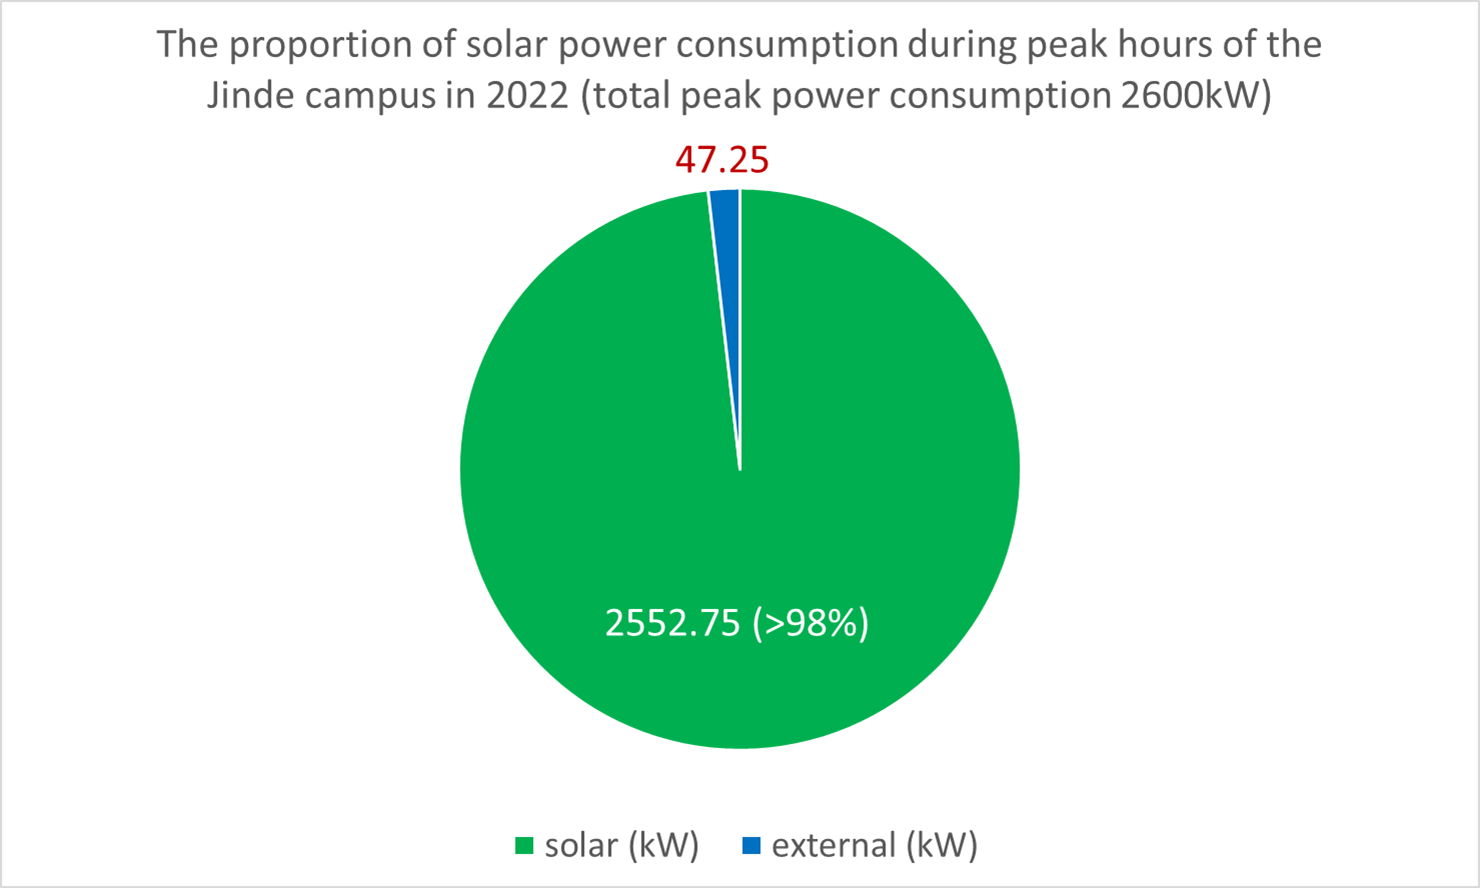 Figure 2. The proportion of solar power consumption during peak hours of the Jinde campus in 2022